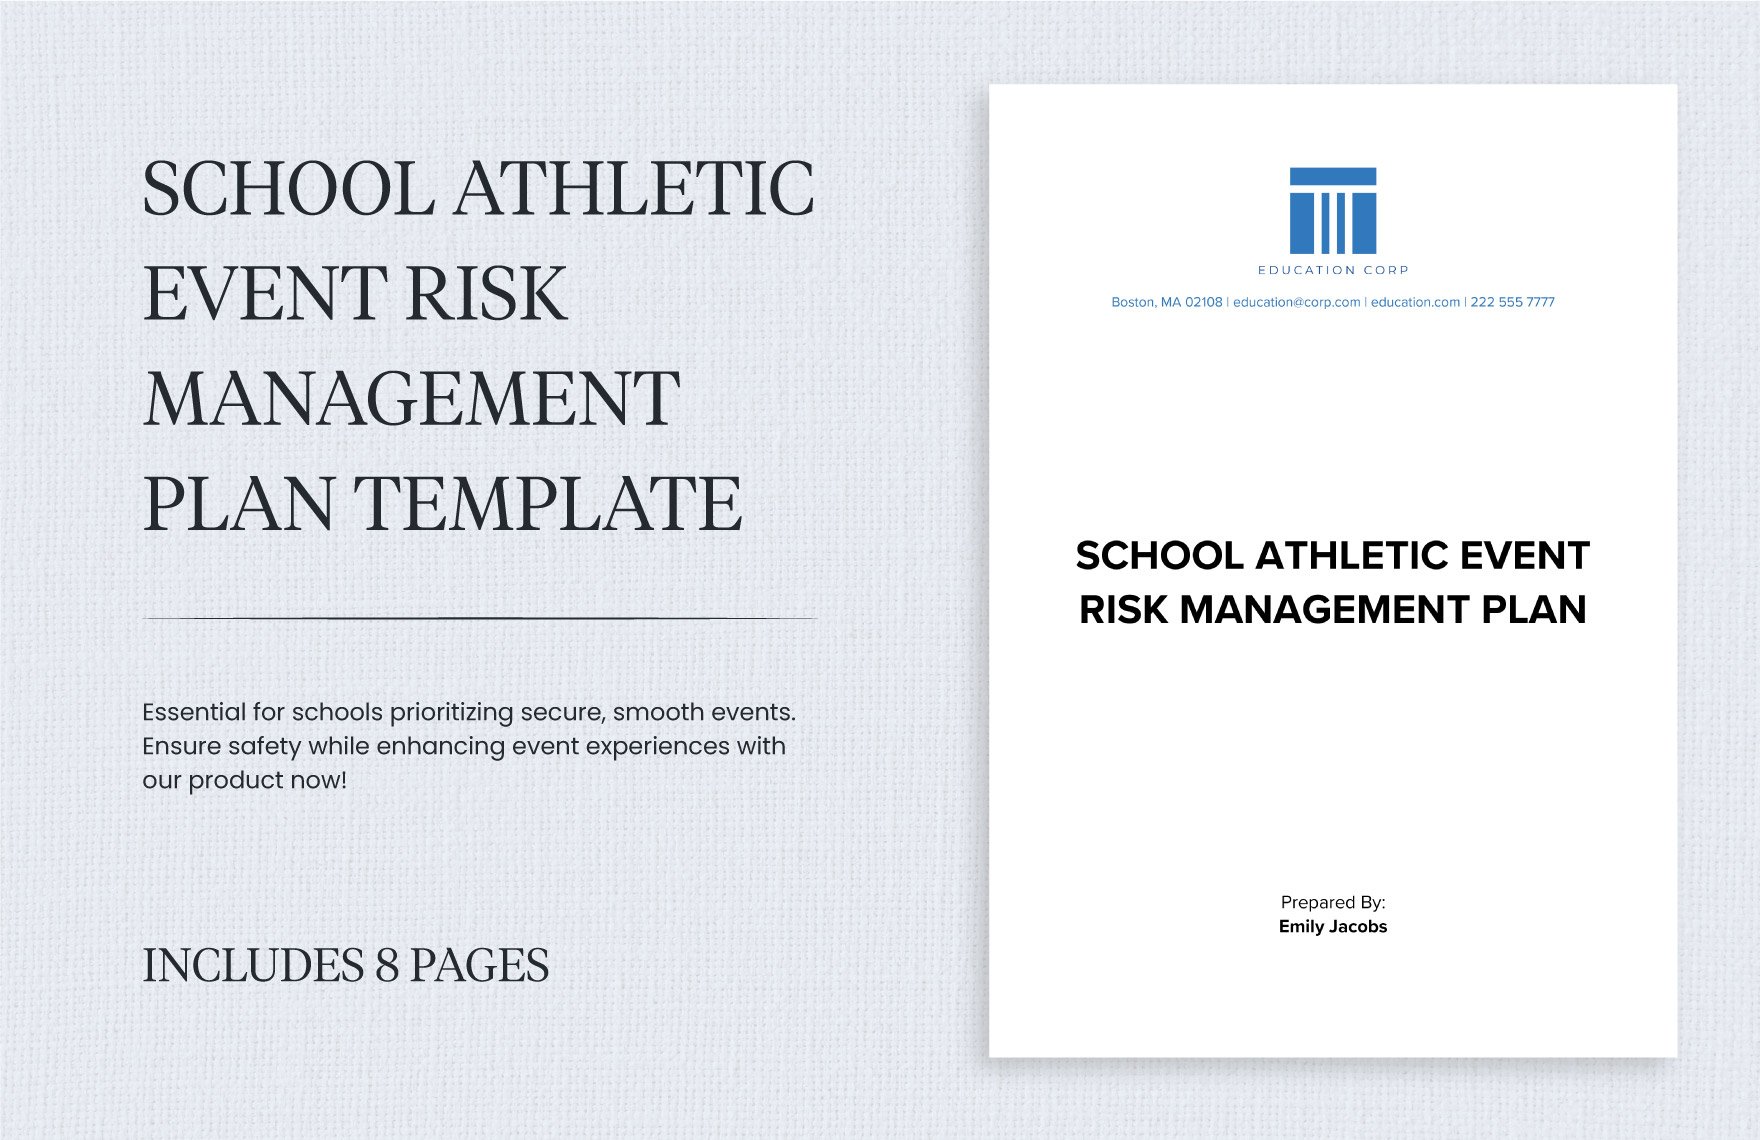 School Athletic Event Risk Management Plan Template in Word, Google Docs, PDF